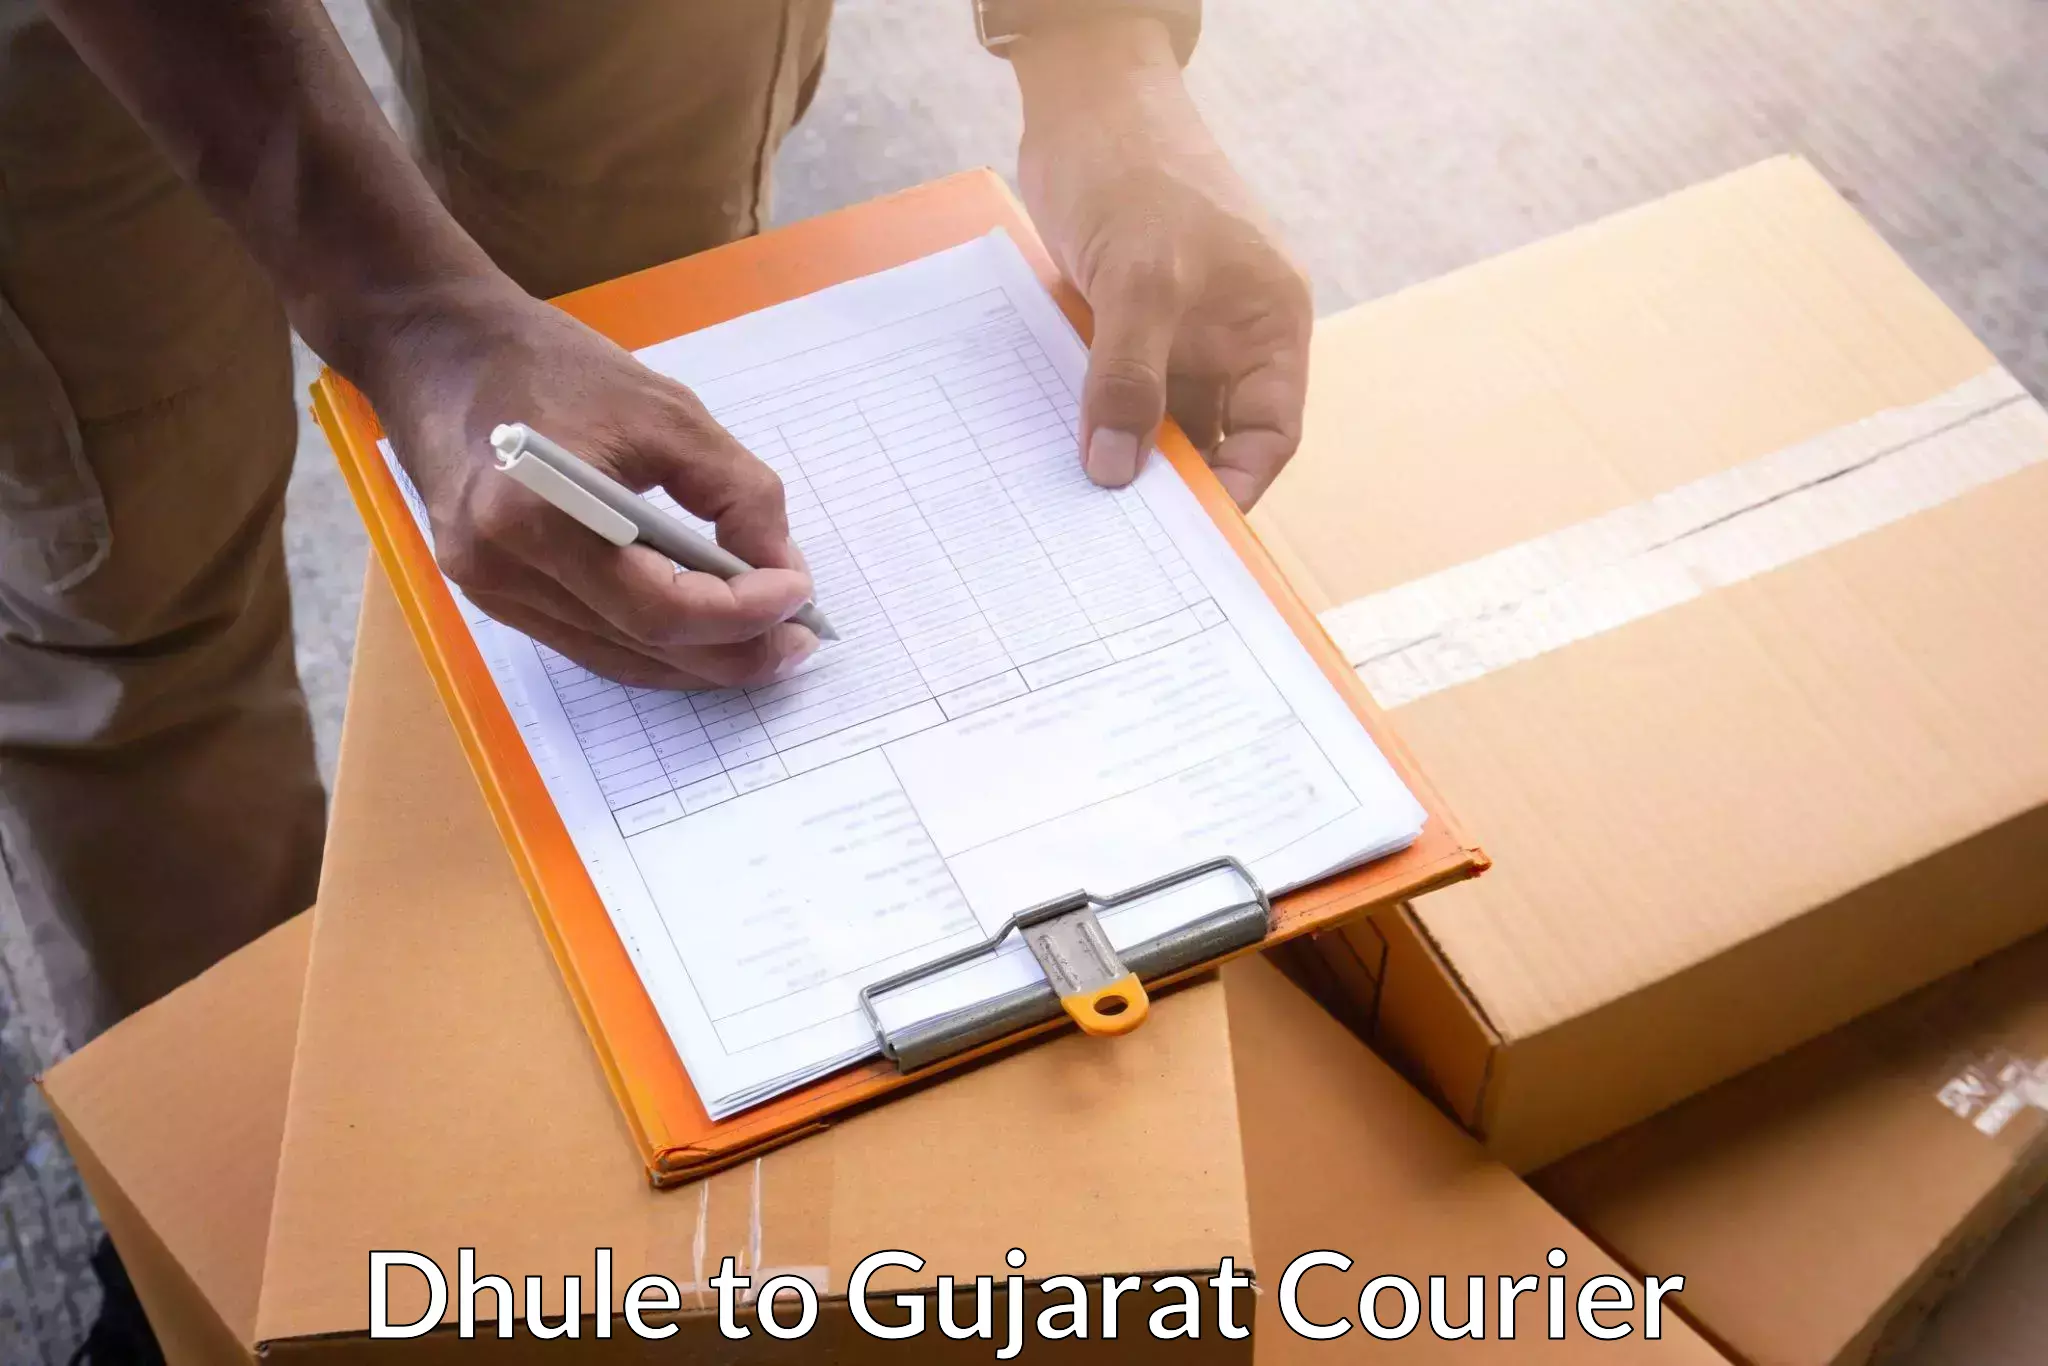 24/7 courier service Dhule to Viramgam